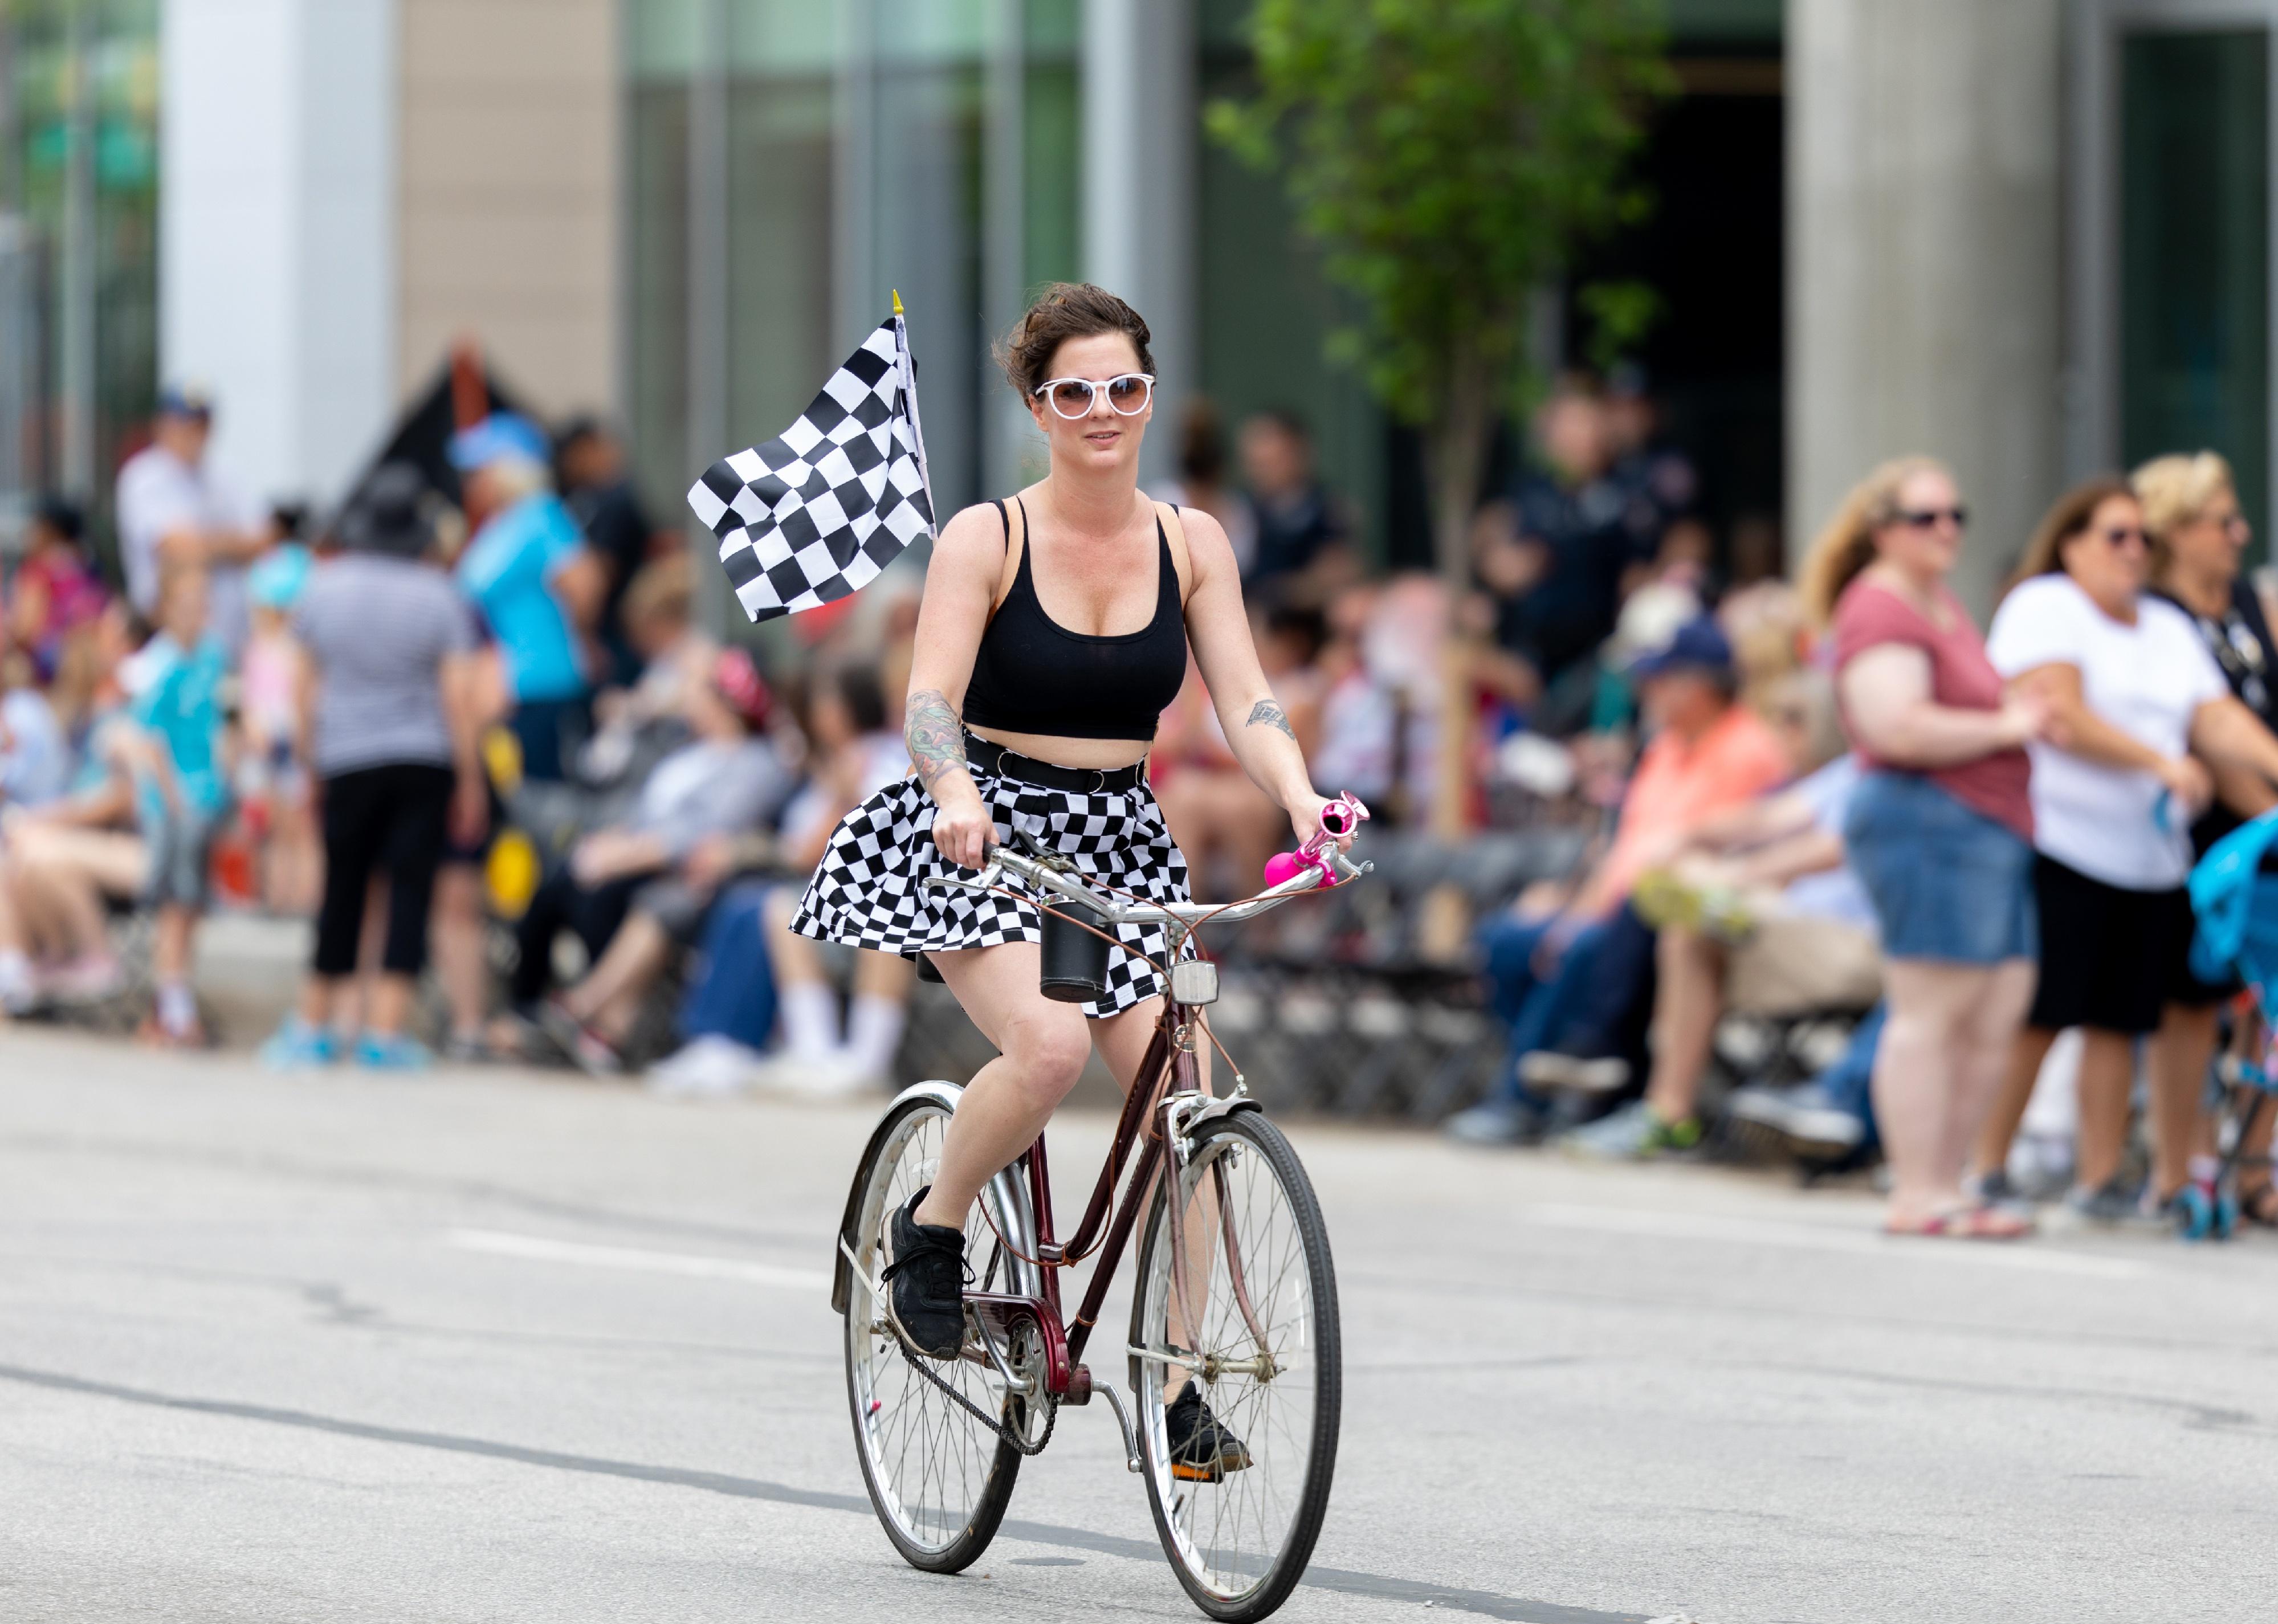 A woman in black and white with a checkered skirt and flag on her bicycle riding down a crowded street.